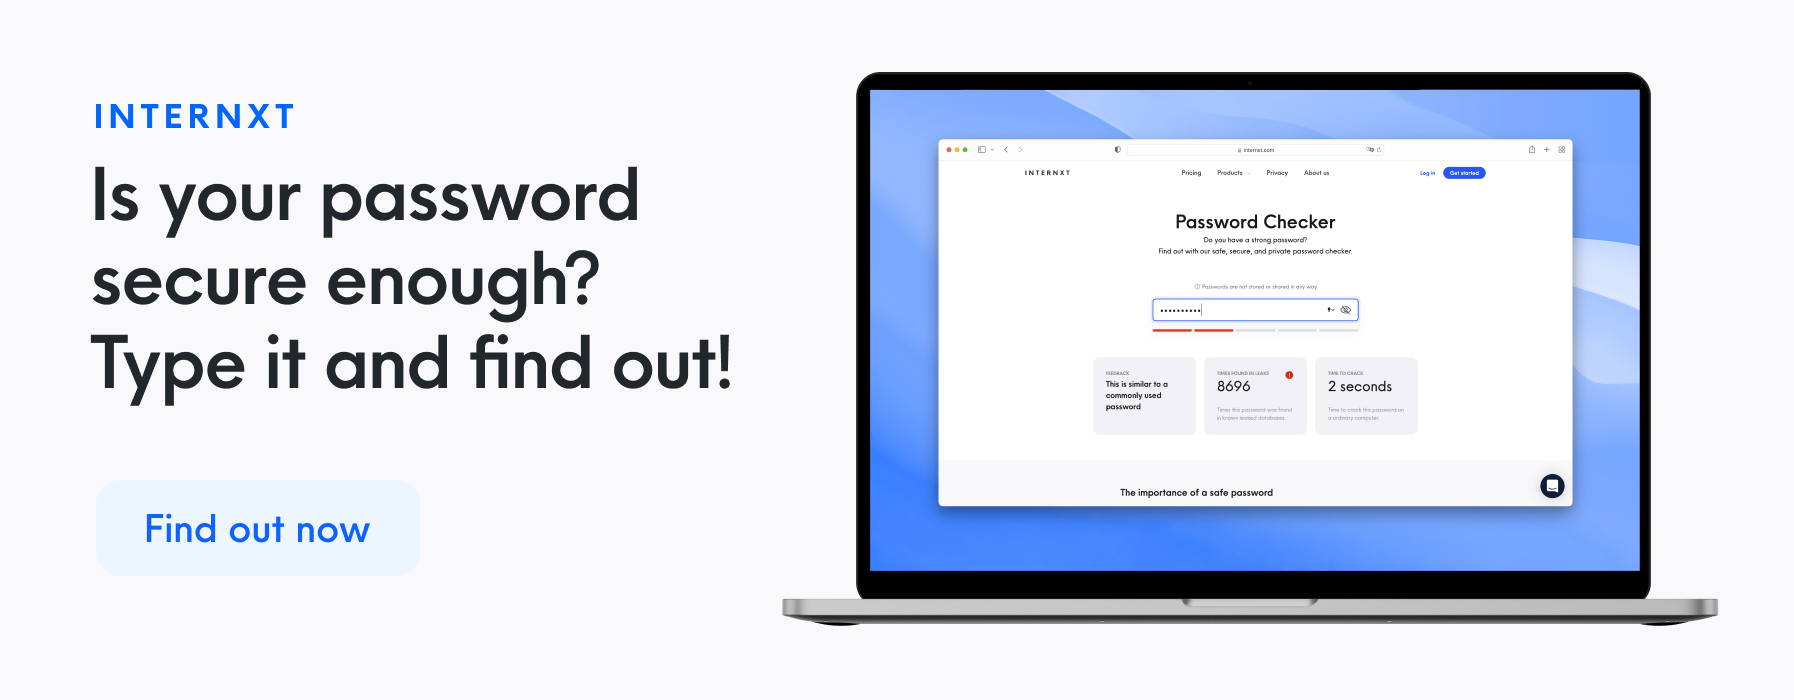 Internxt Password is a safe way to check your password and security